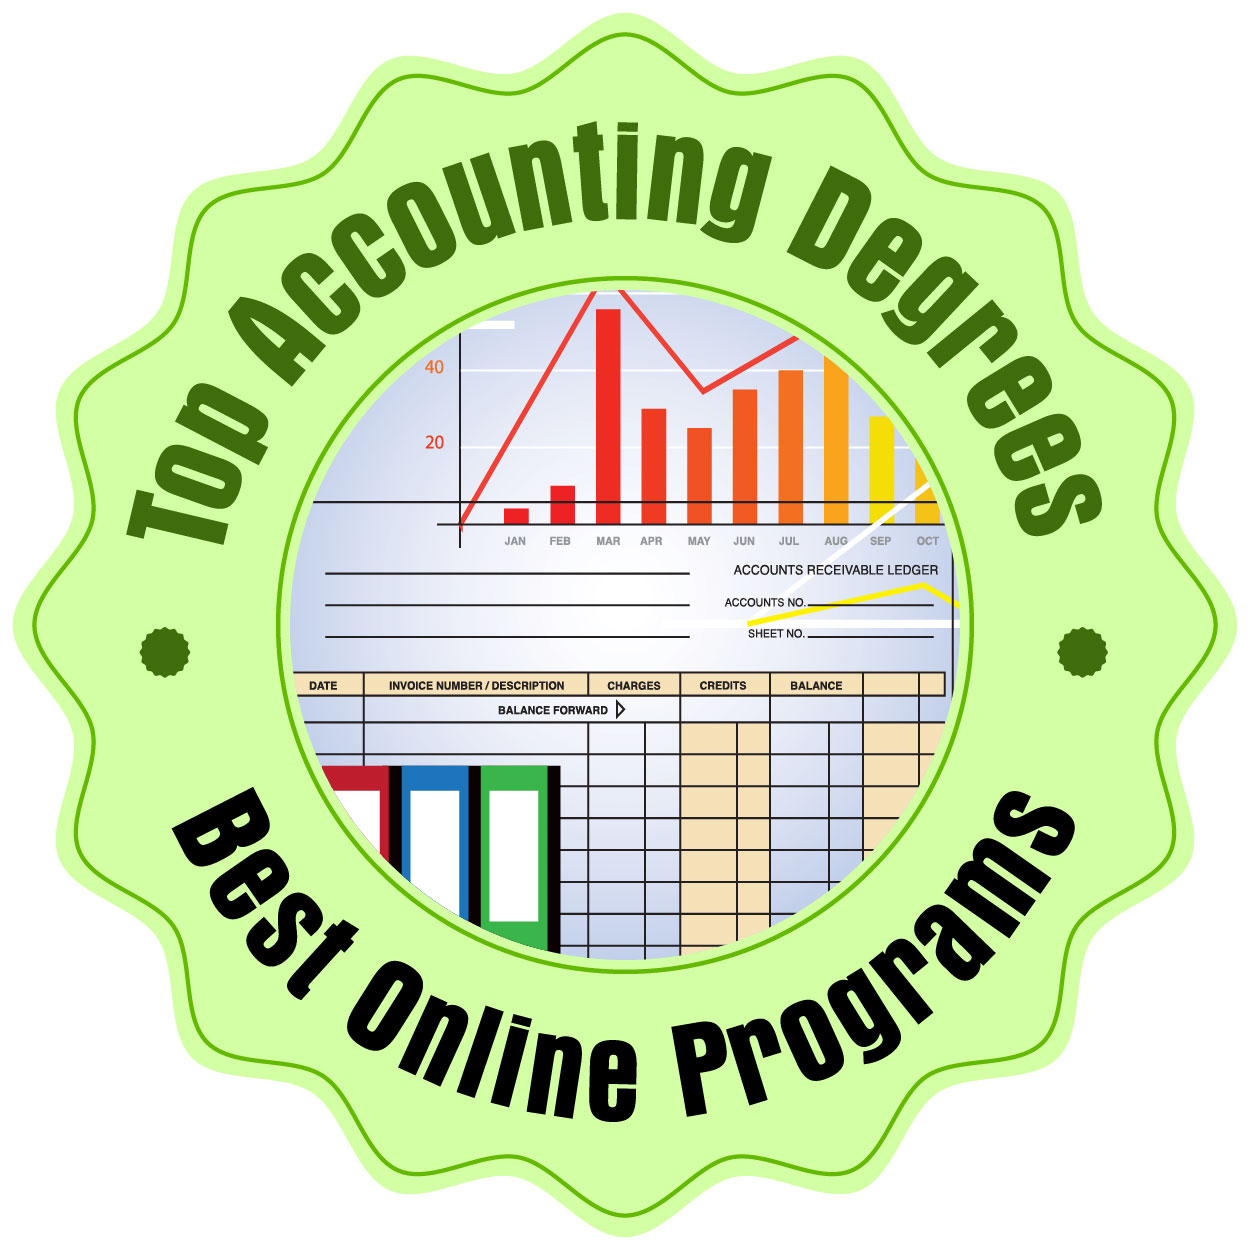 Best Accounting Schools in New York
